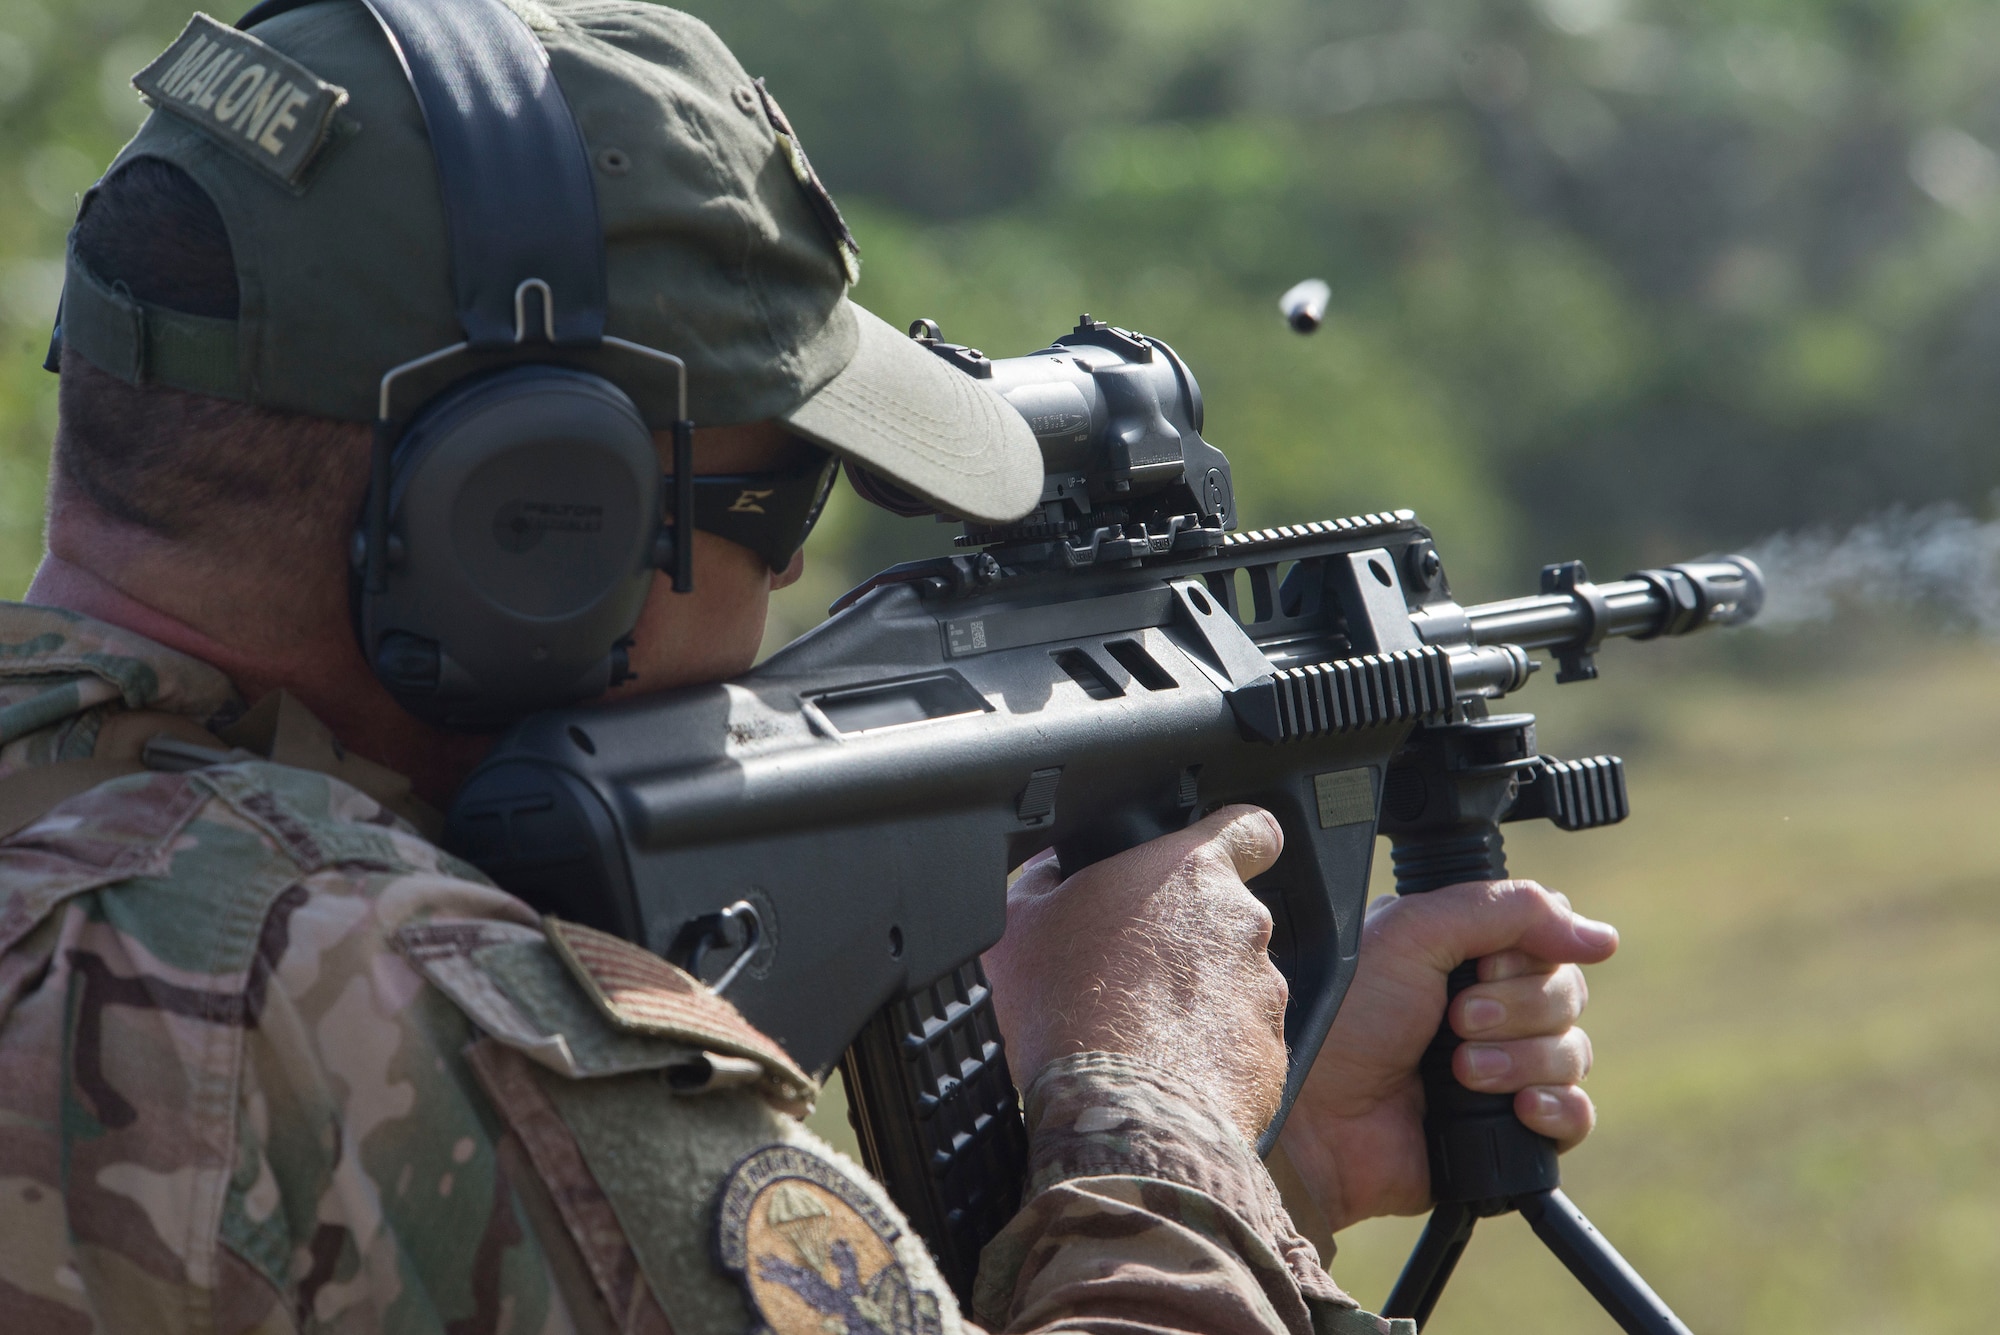 A member of the U.S. Air Force practices shooting the Royal Australian Air Force (RAAF) EF88 assault rifle during Pacific Defender 20-1 at Andersen Air Force Base, Guam, Feb. 12, 2020.